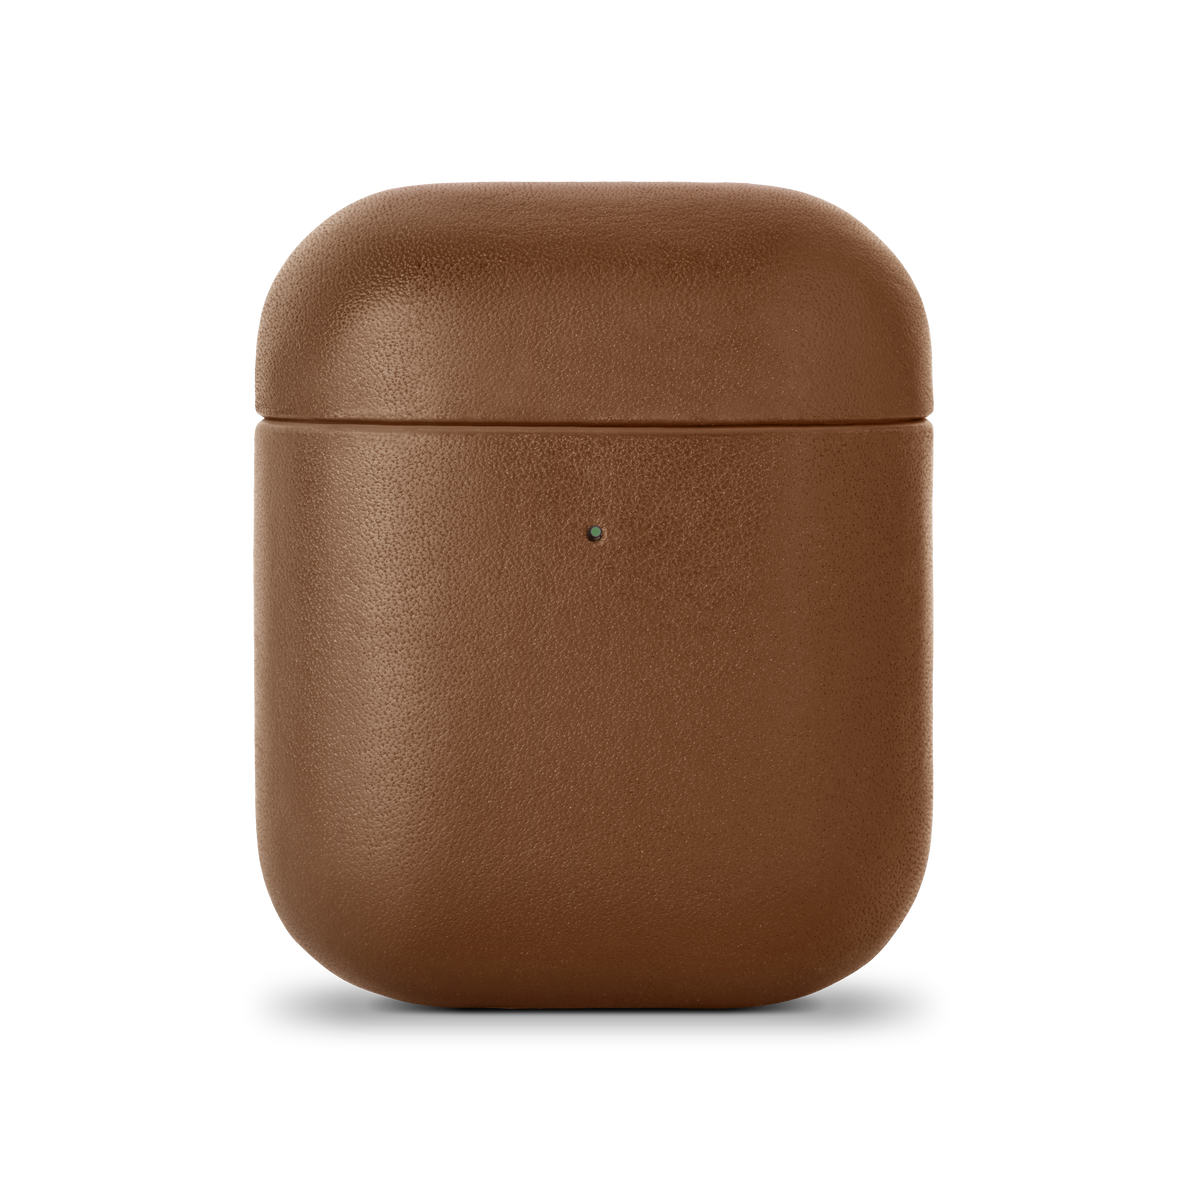 NATIVE UNION Classic Leather Case for Airpods - Tan